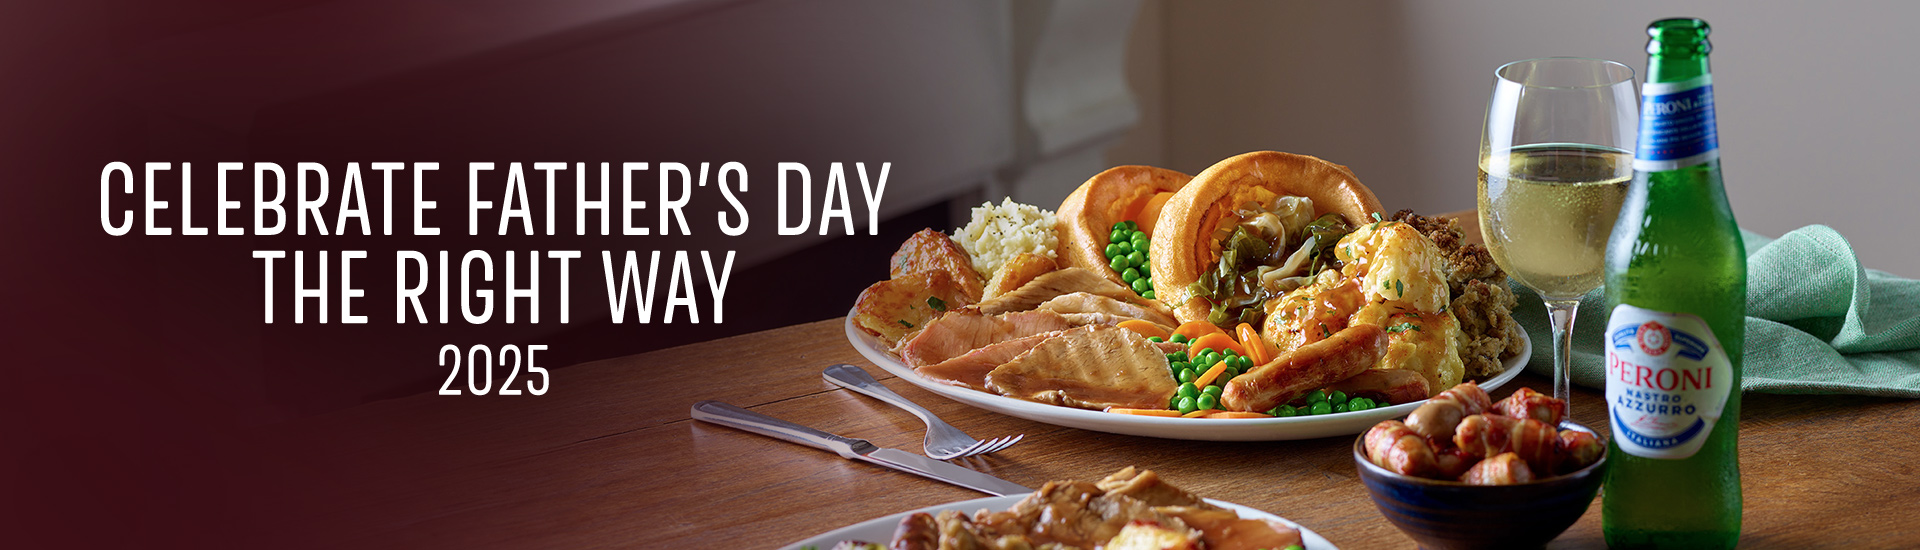 Father’s day carvery in Lytham St Annes